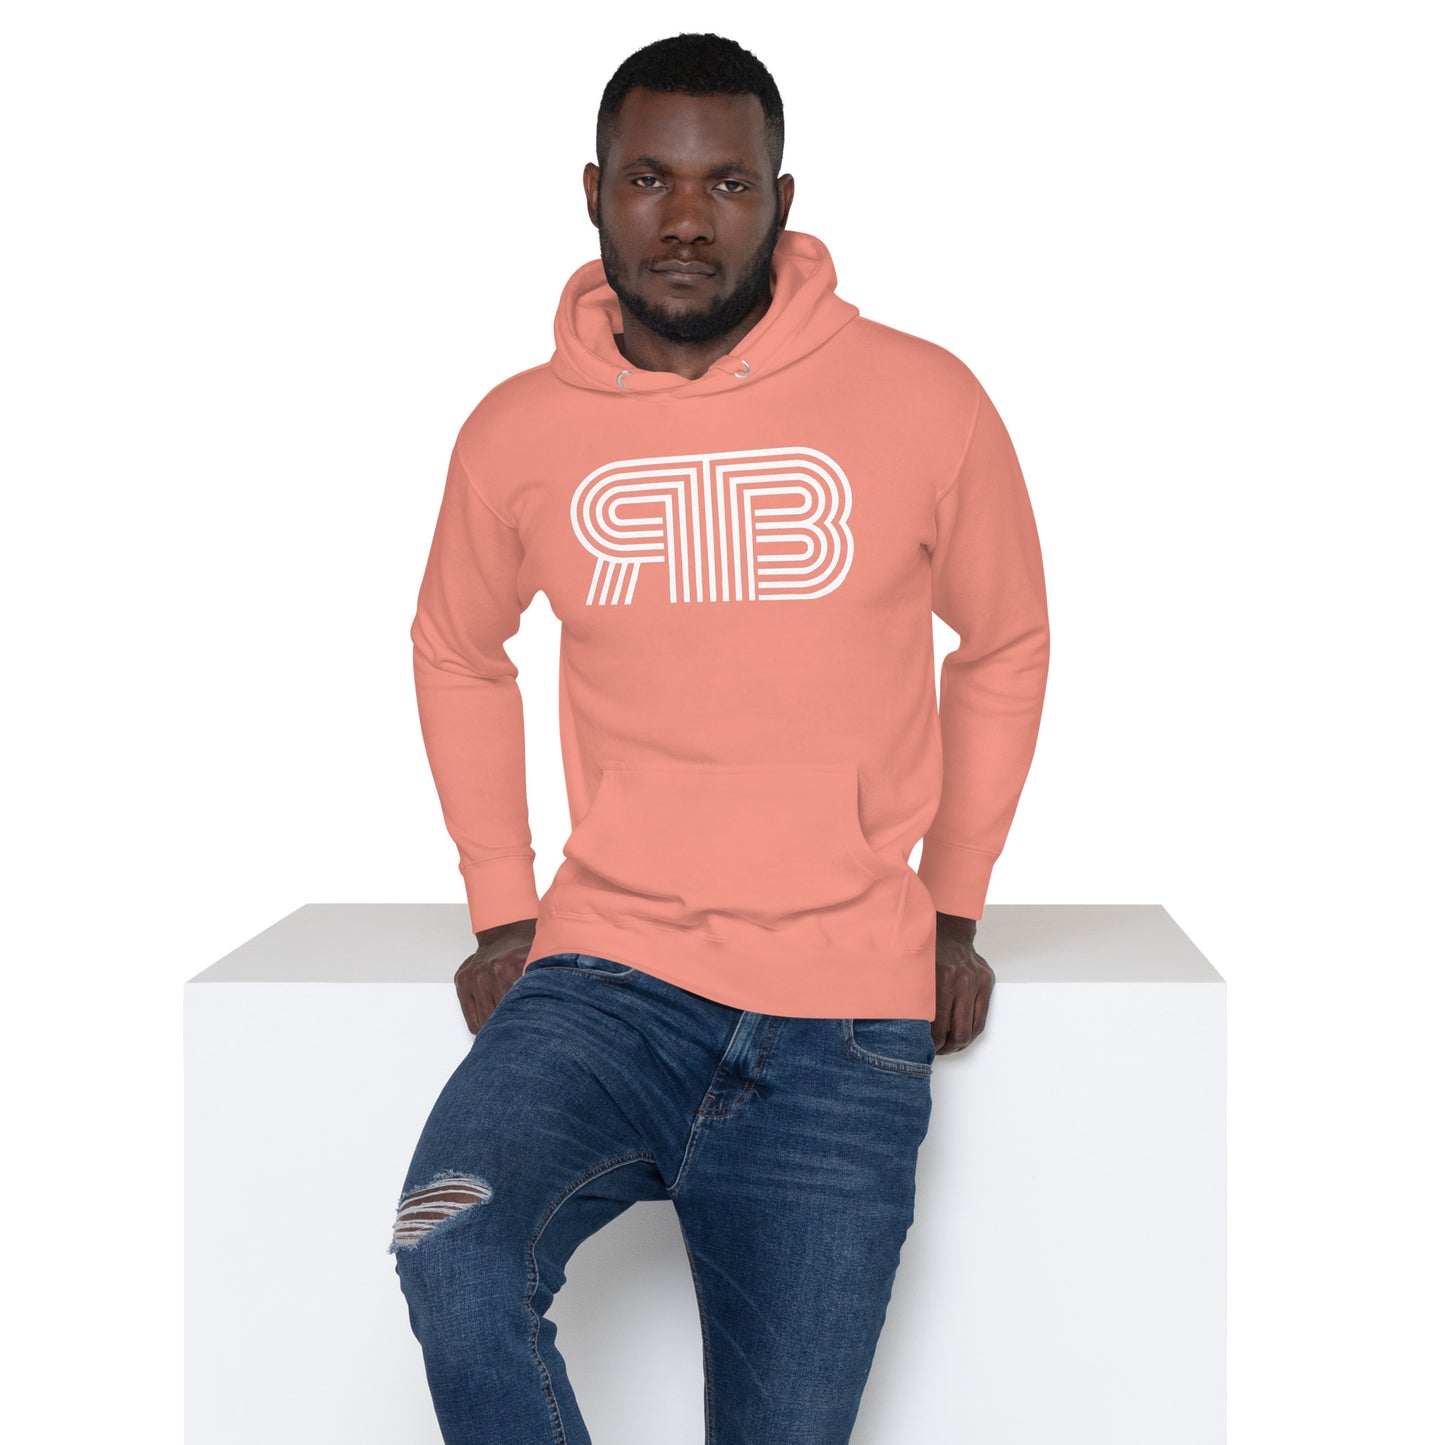 Classic RB "Dusty Rose" Hoodie